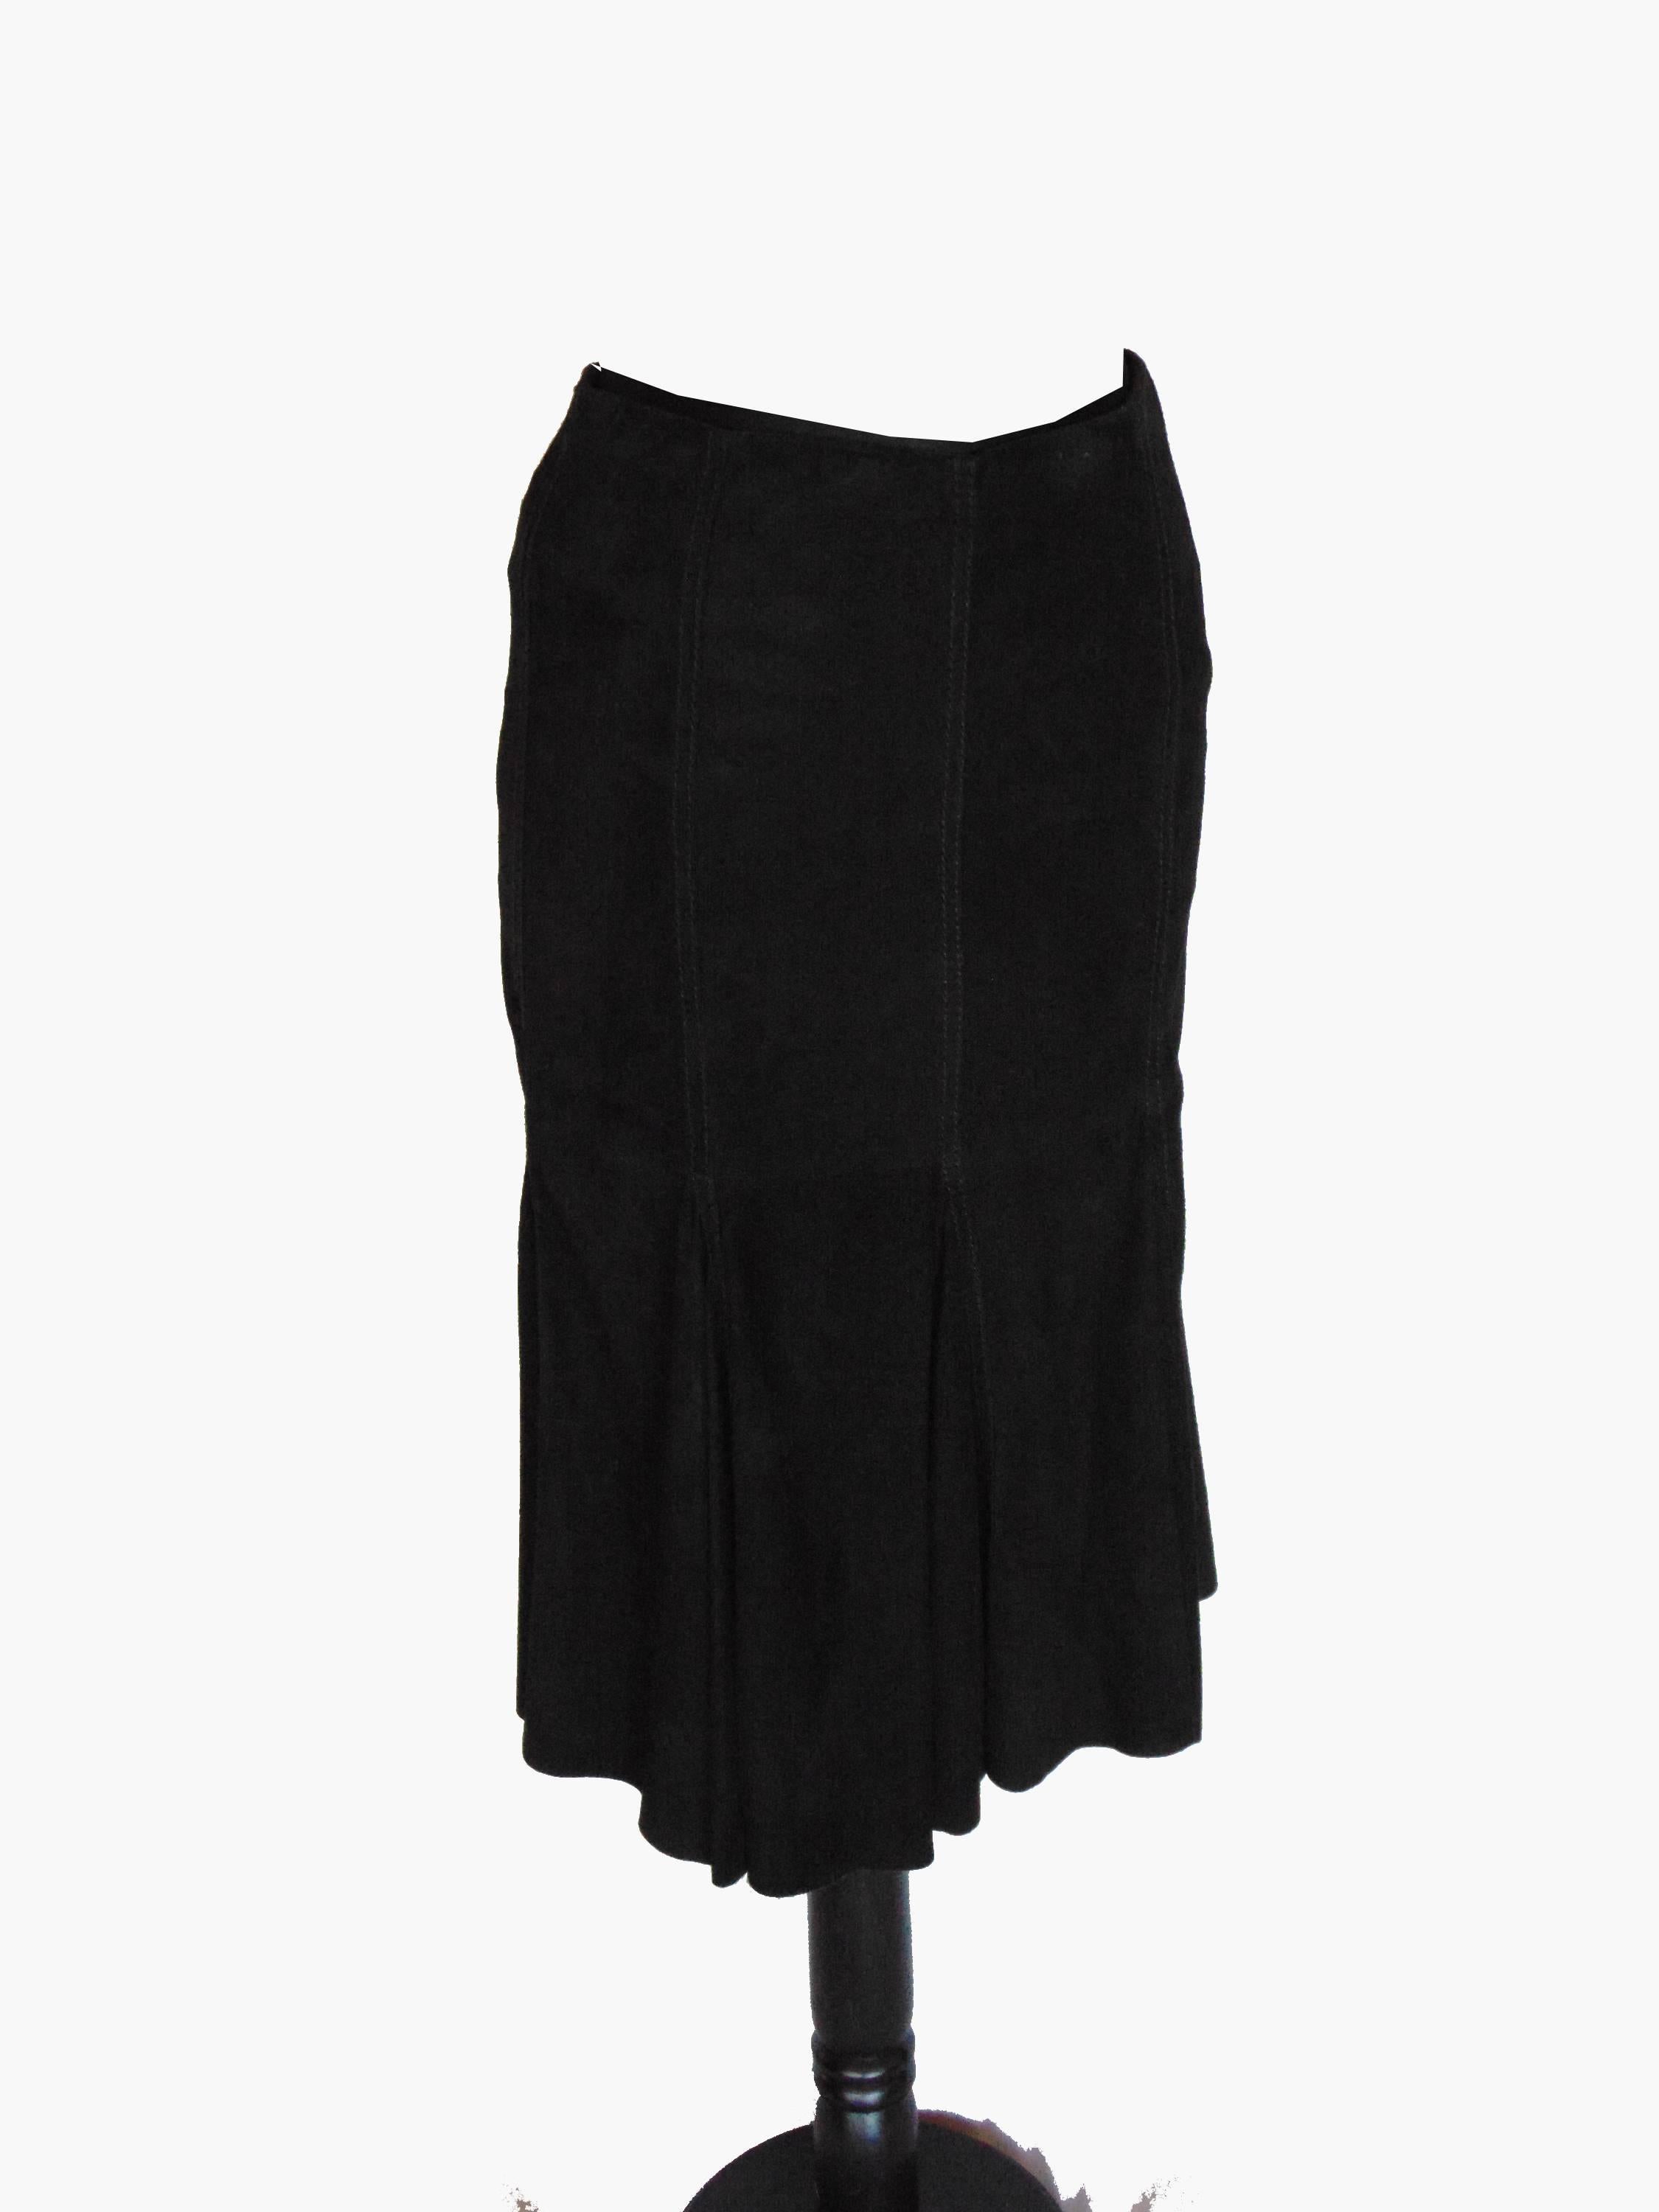 Genny Italy Supple Black Suede Leather Mermaid Skirt 1990s Size S 2